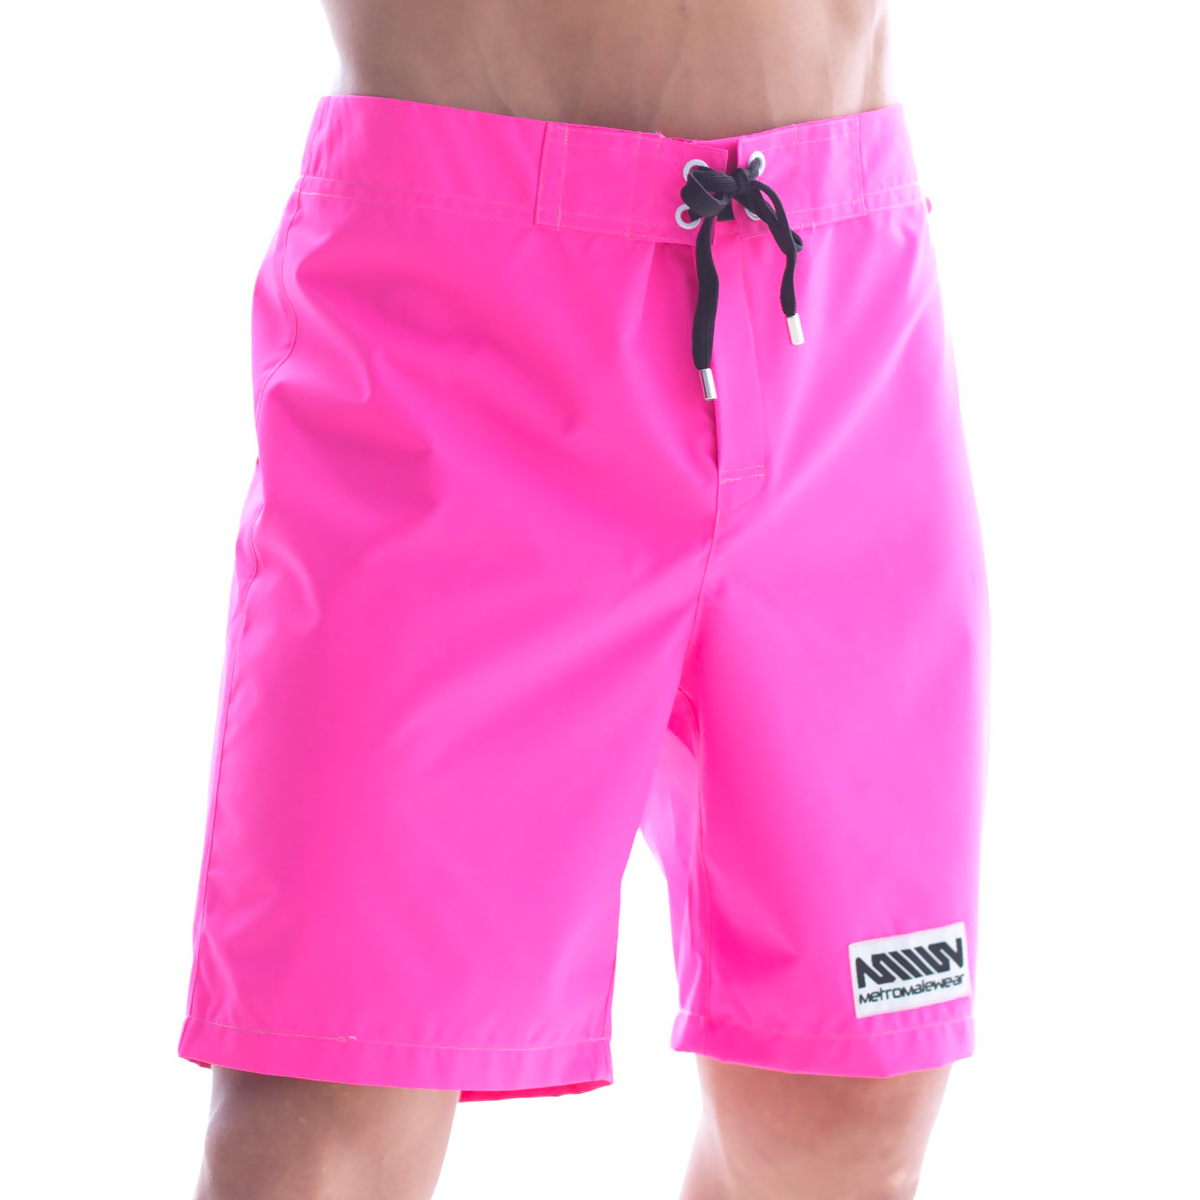 [M2W] Physique Board Short Neon Pink (4706-02)